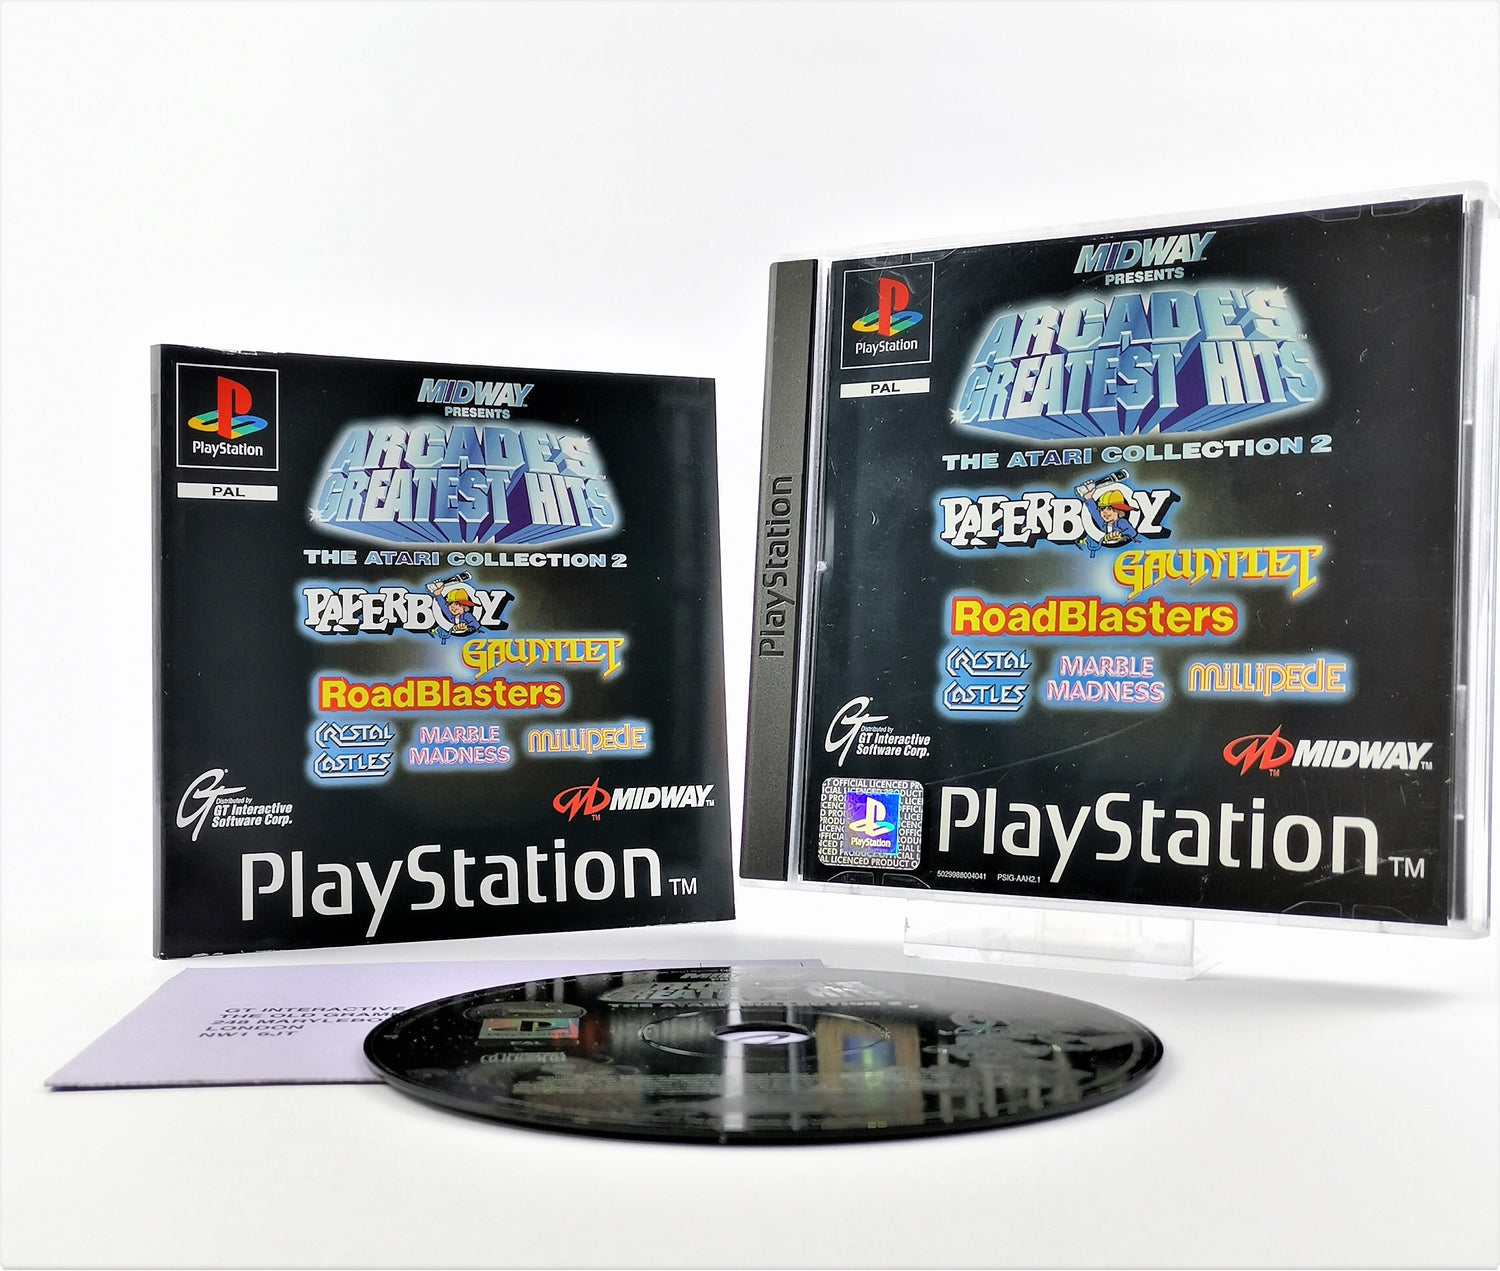 Sony Playstation 1 game: Midway Presents Arcade greatest hits - original packaging instructions